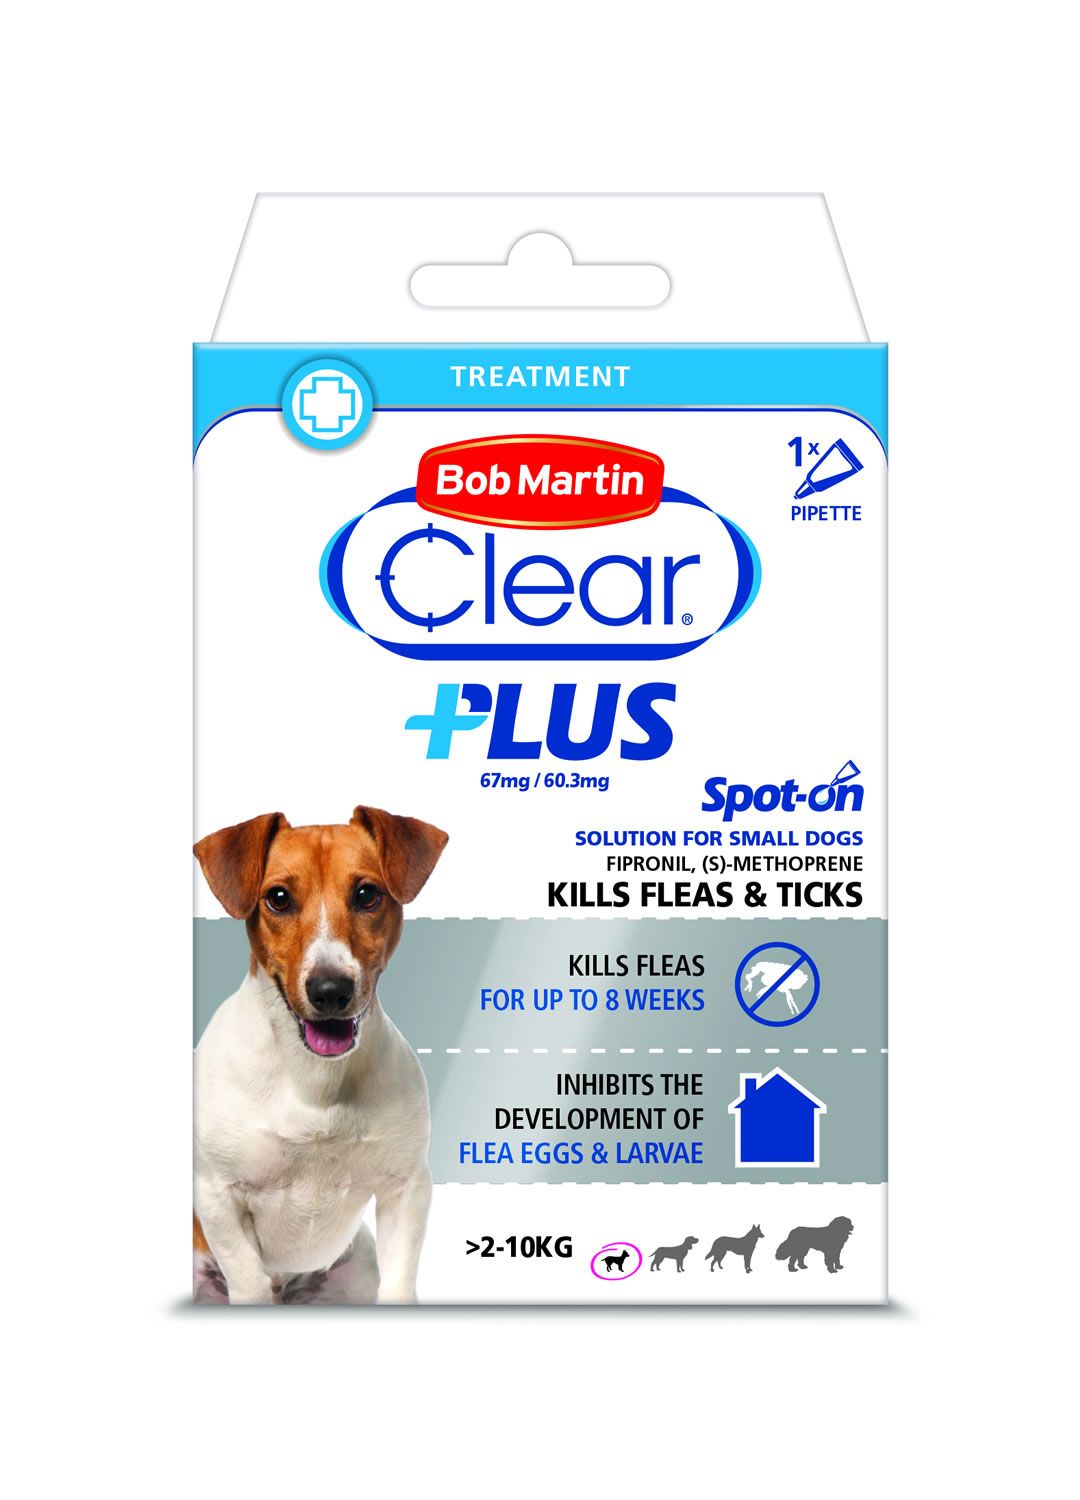 Bob Martin Clear Plus Spot On Solution for Dogs & Cats VioVet.co.uk